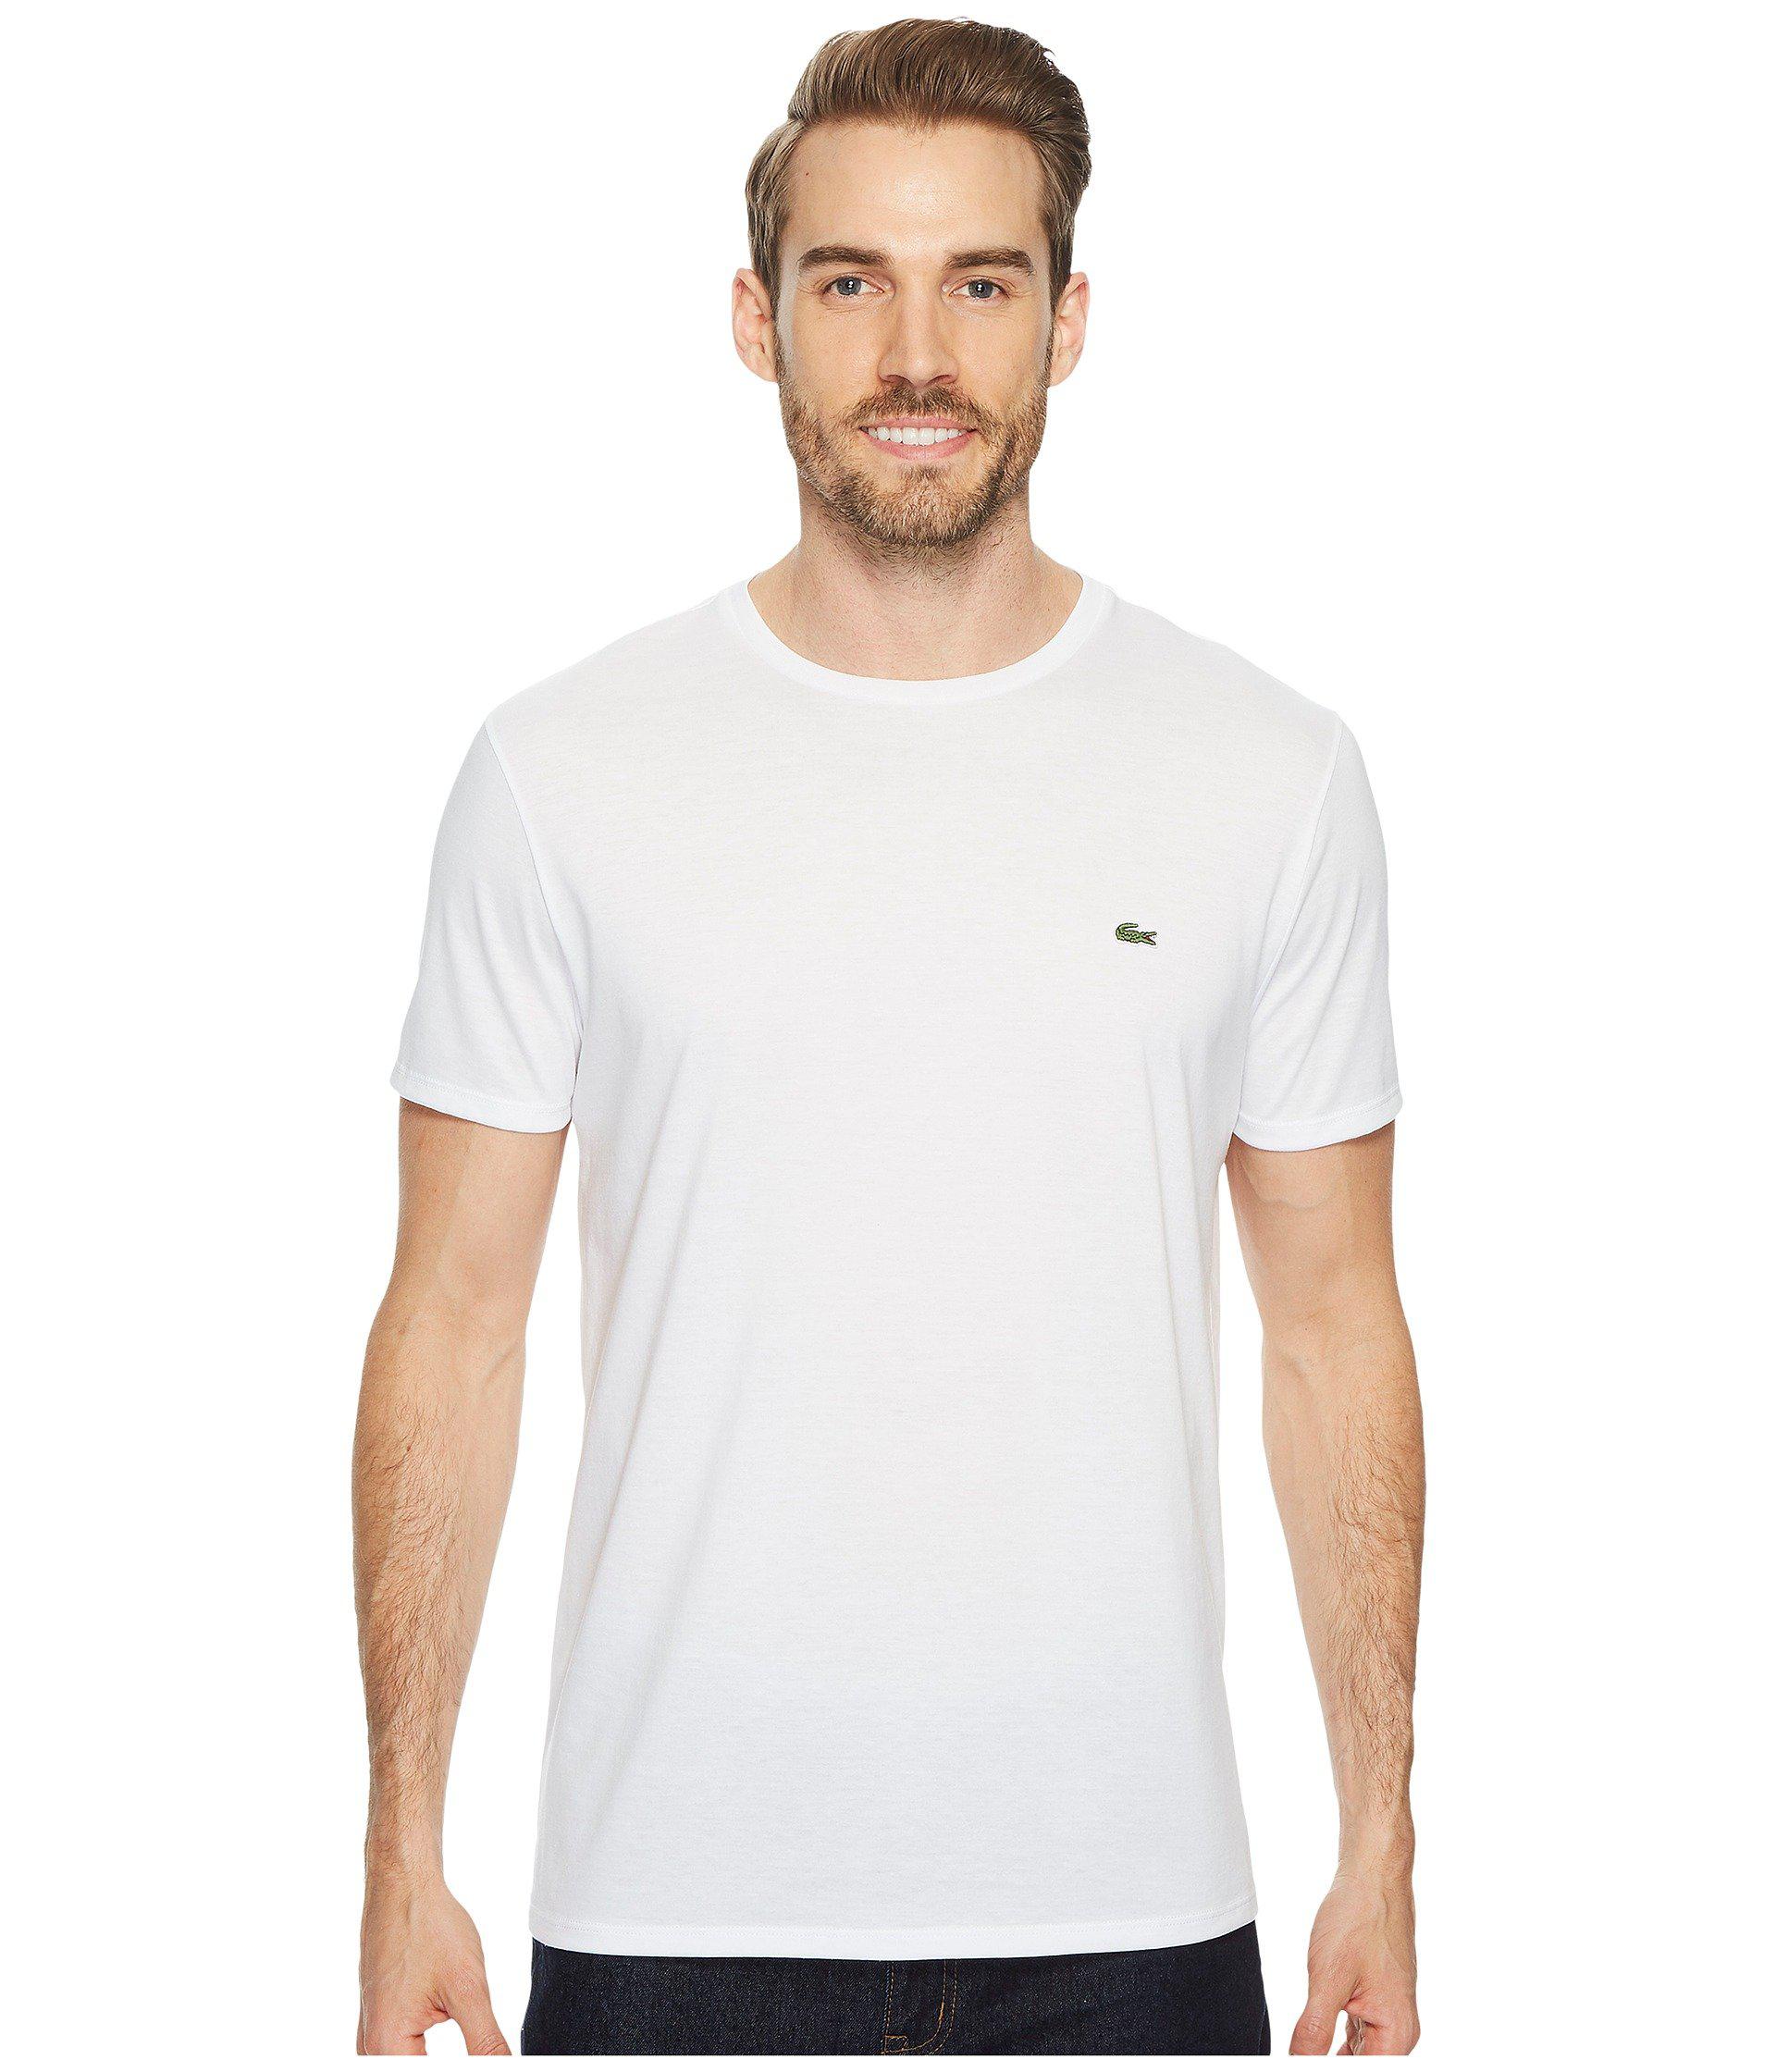 Lacoste Cotton Tees in White for Men - Lyst